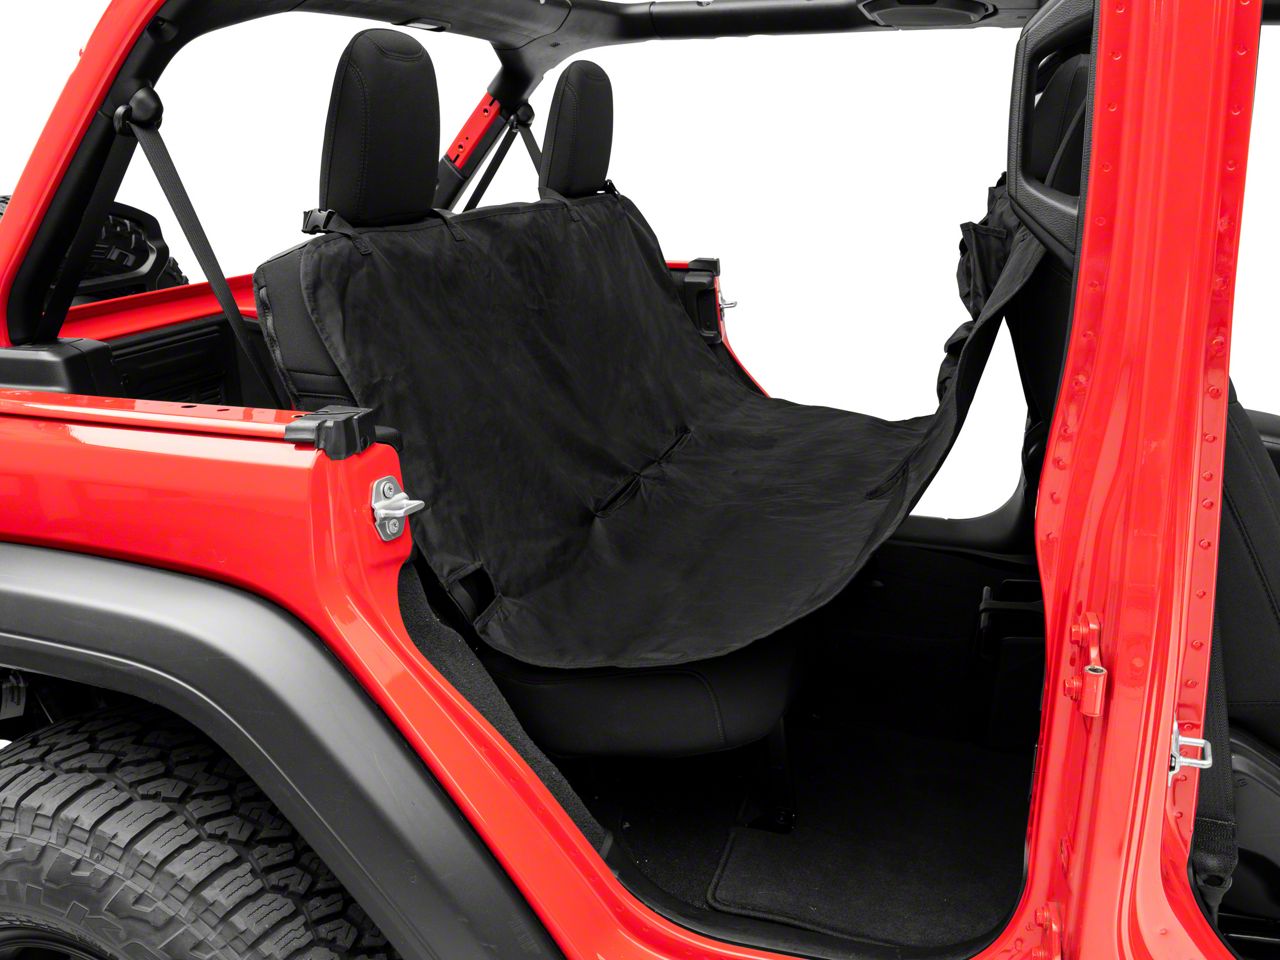 RedRock Jeep Wrangler Waterproof Pet Guard Seat Cover Hammock J156723 Universal; Some Adaptation May Be Required) Free Shipping